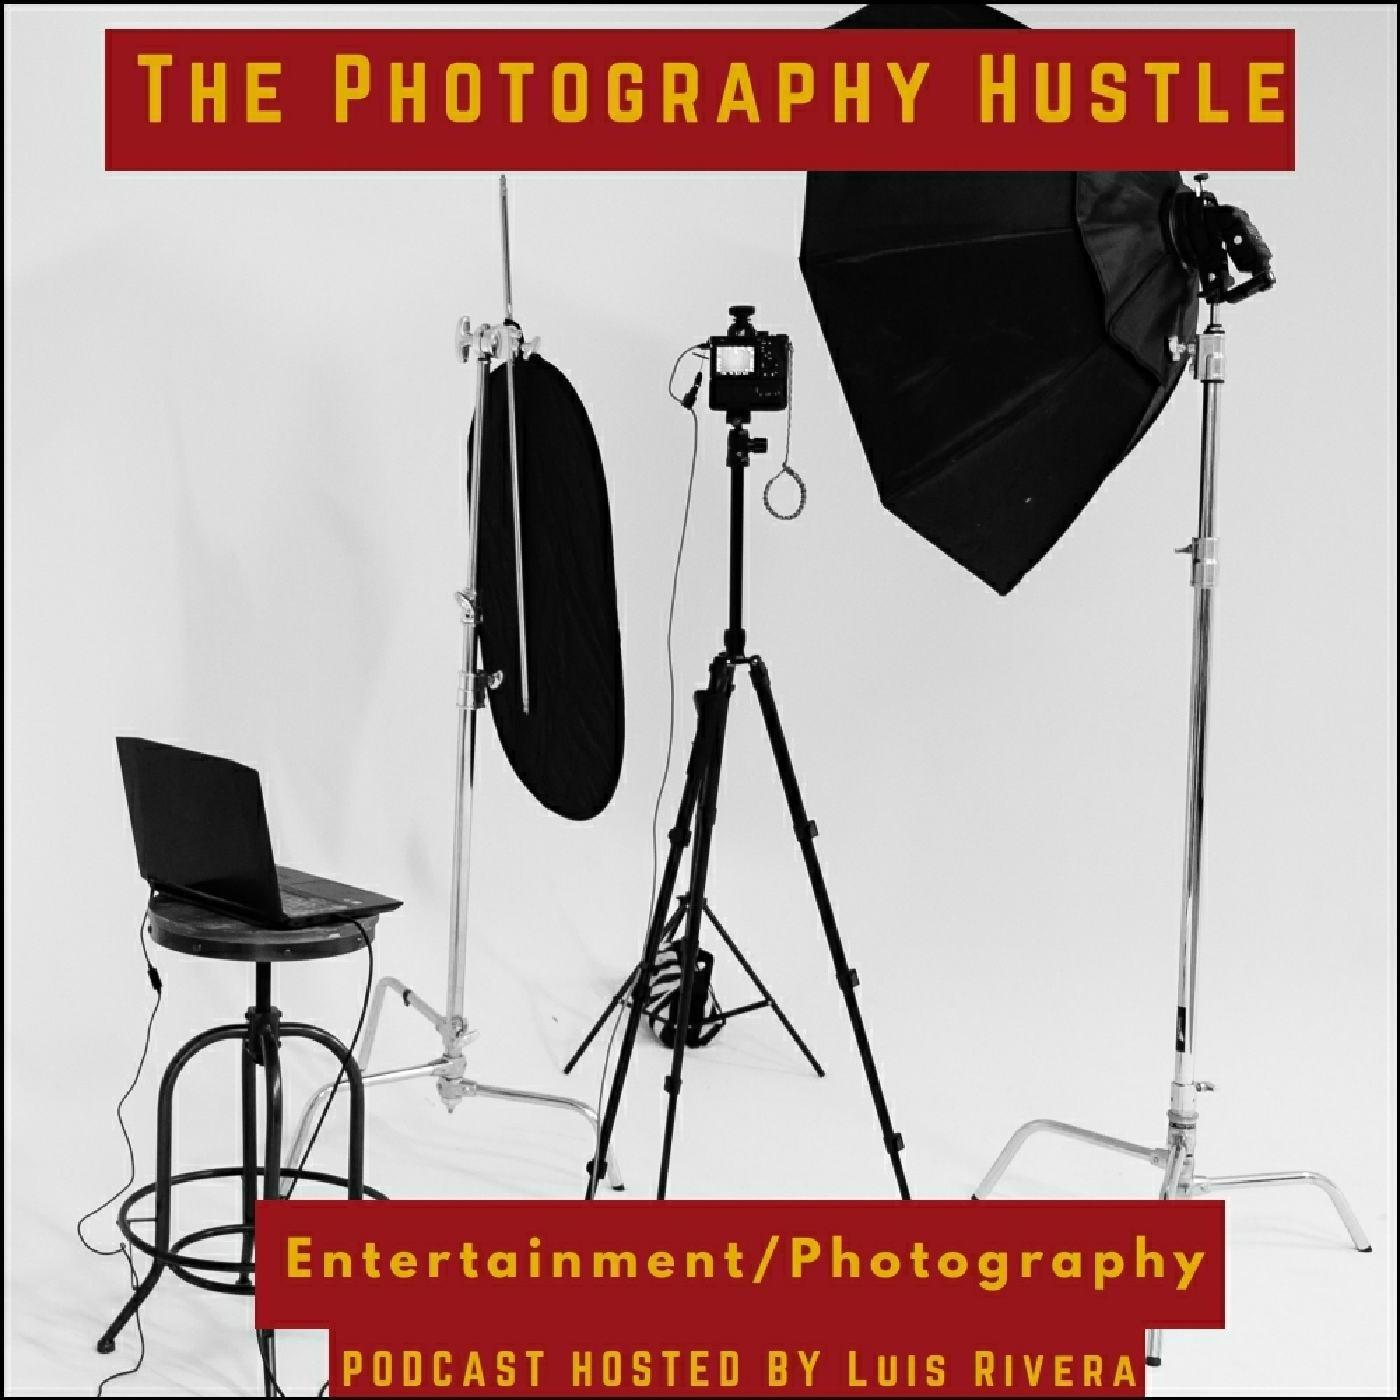 The Photography Hustle